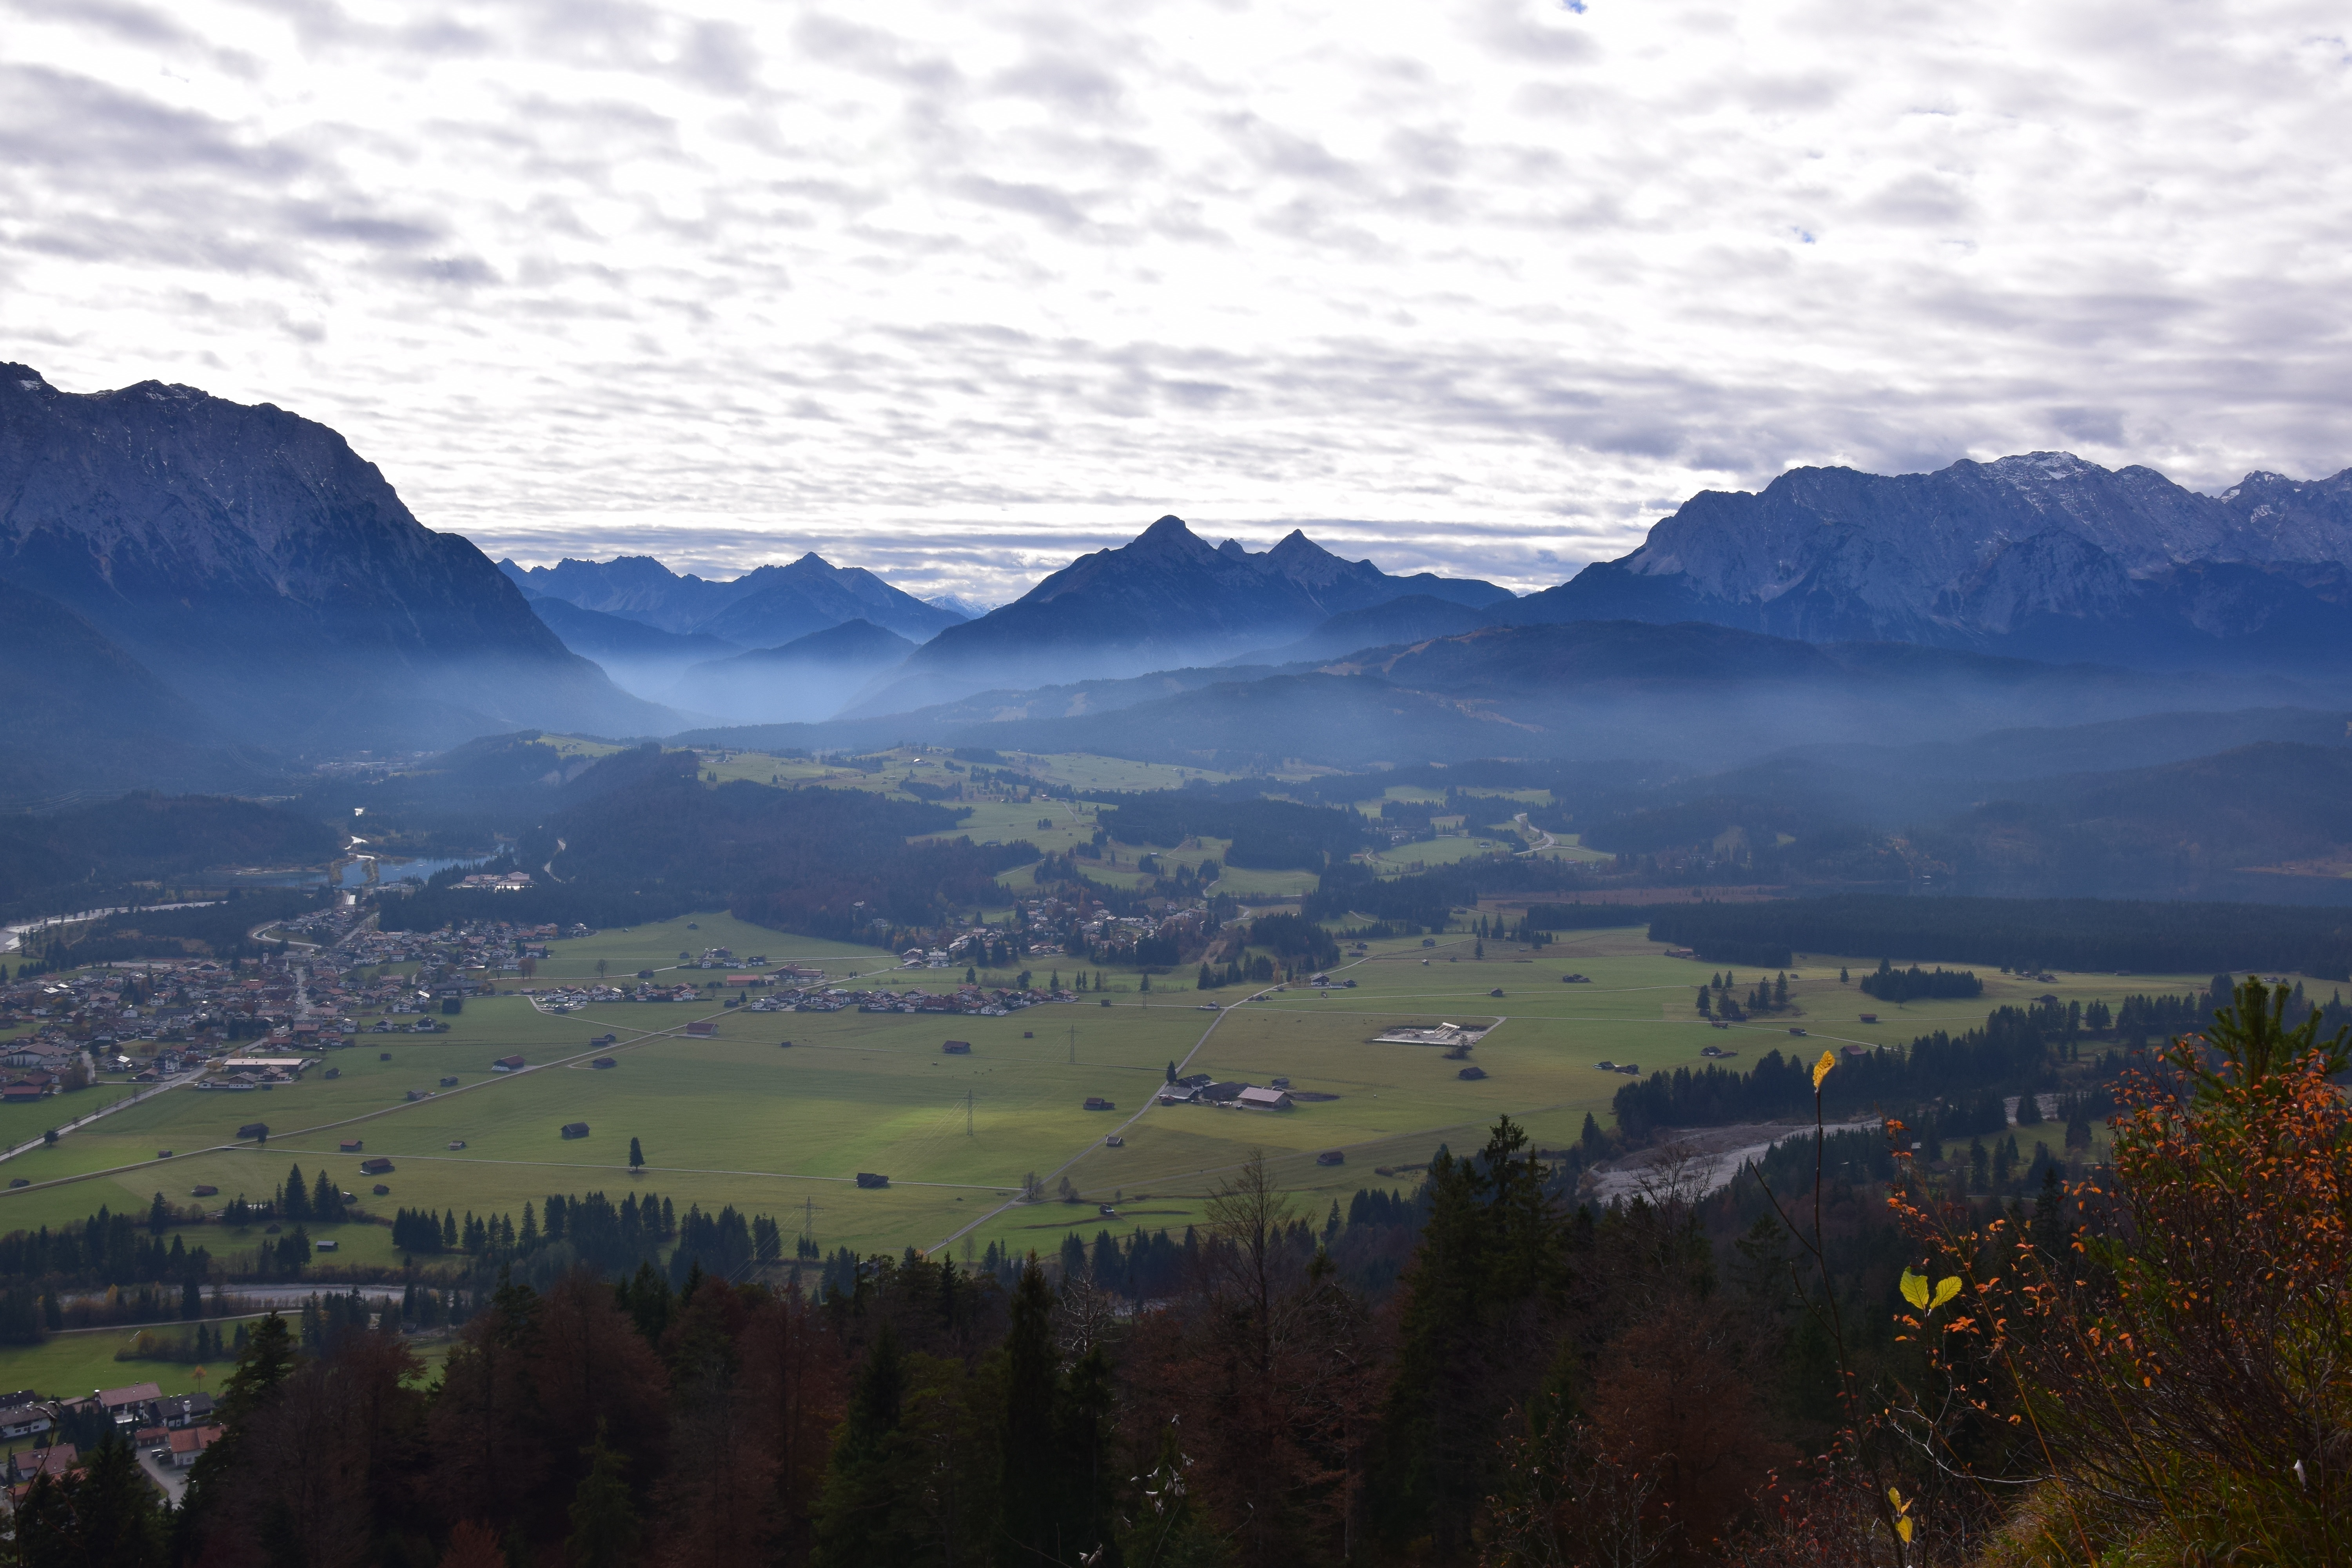 94639 download wallpaper nature, mountains, germany, bavaria, zugspitze, tsugspitze screensavers and pictures for free